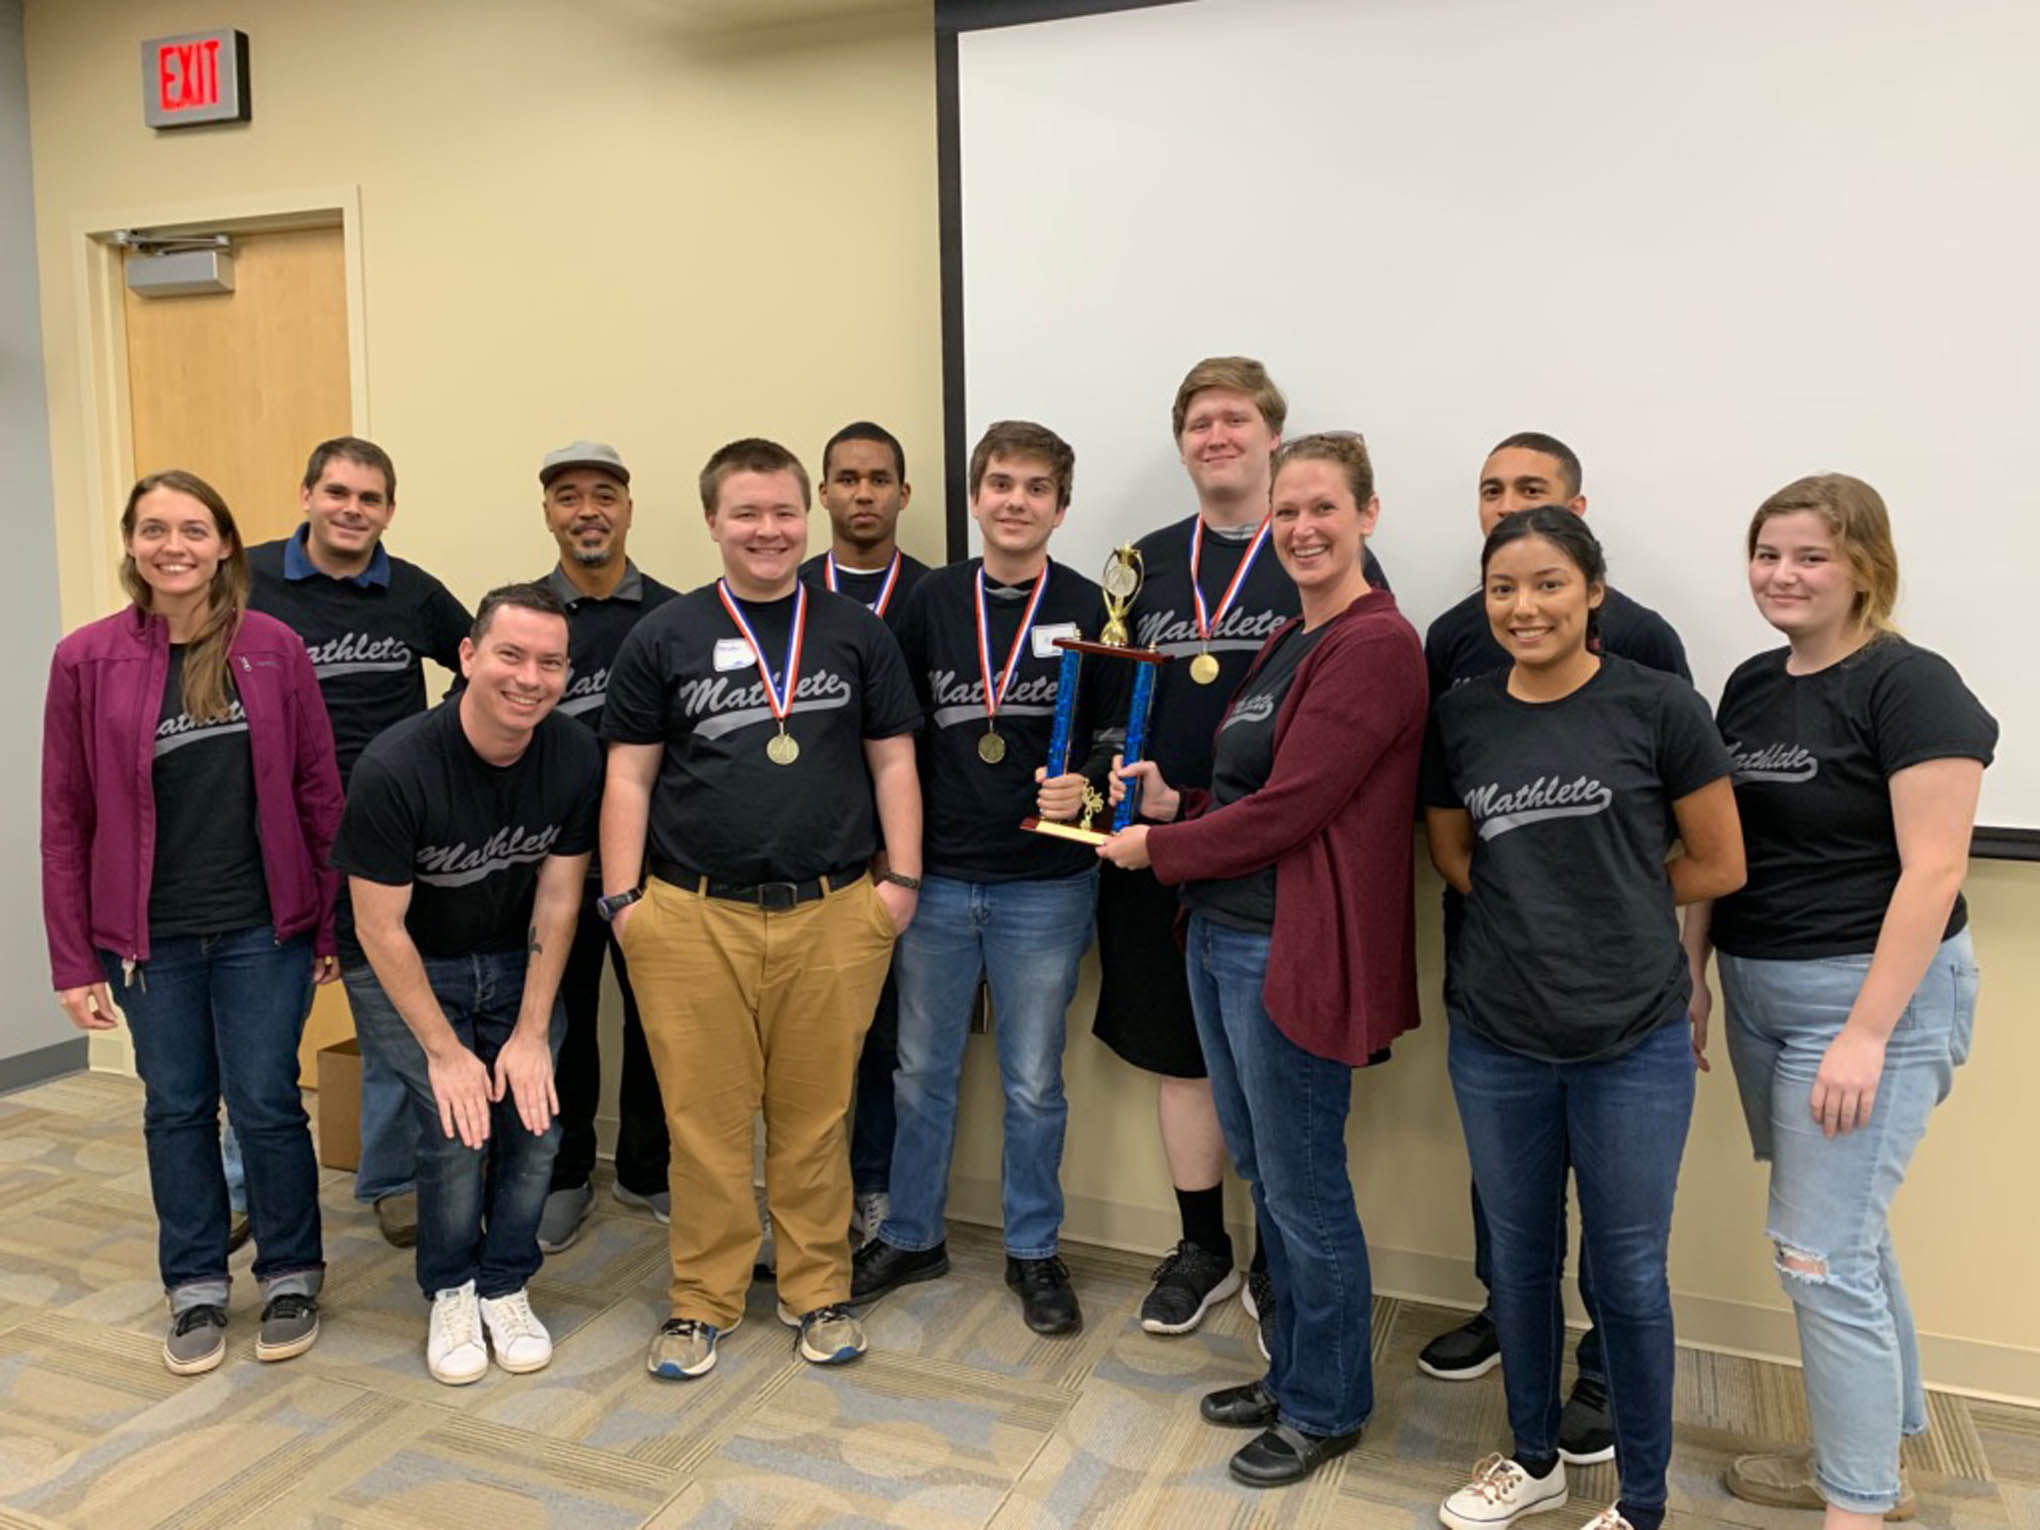 Read the full story, CCCC Math Club wins competition